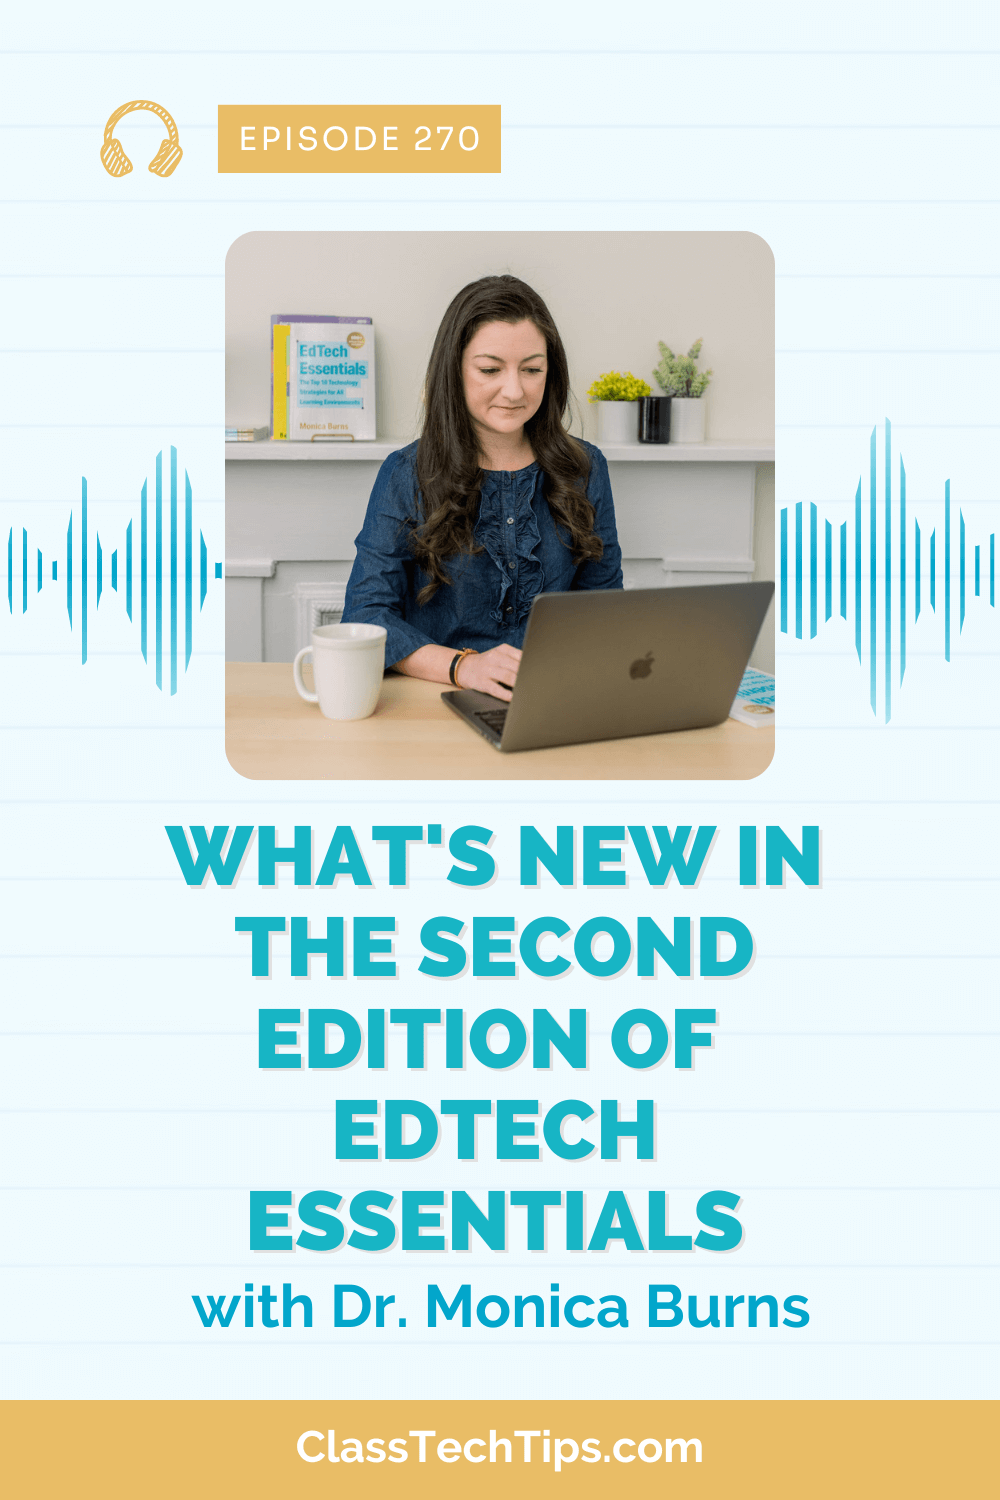 Discover what's new in the second edition of EdTech Essentials with Dr. Monica Burns in Episode 270 of the Easy EdTech Podcast. The image features Dr. Monica Burns at a desk with her laptop and her book, EdTech Essentials, on a shelf behind her. Learn about the latest updates and strategies in educational technology.